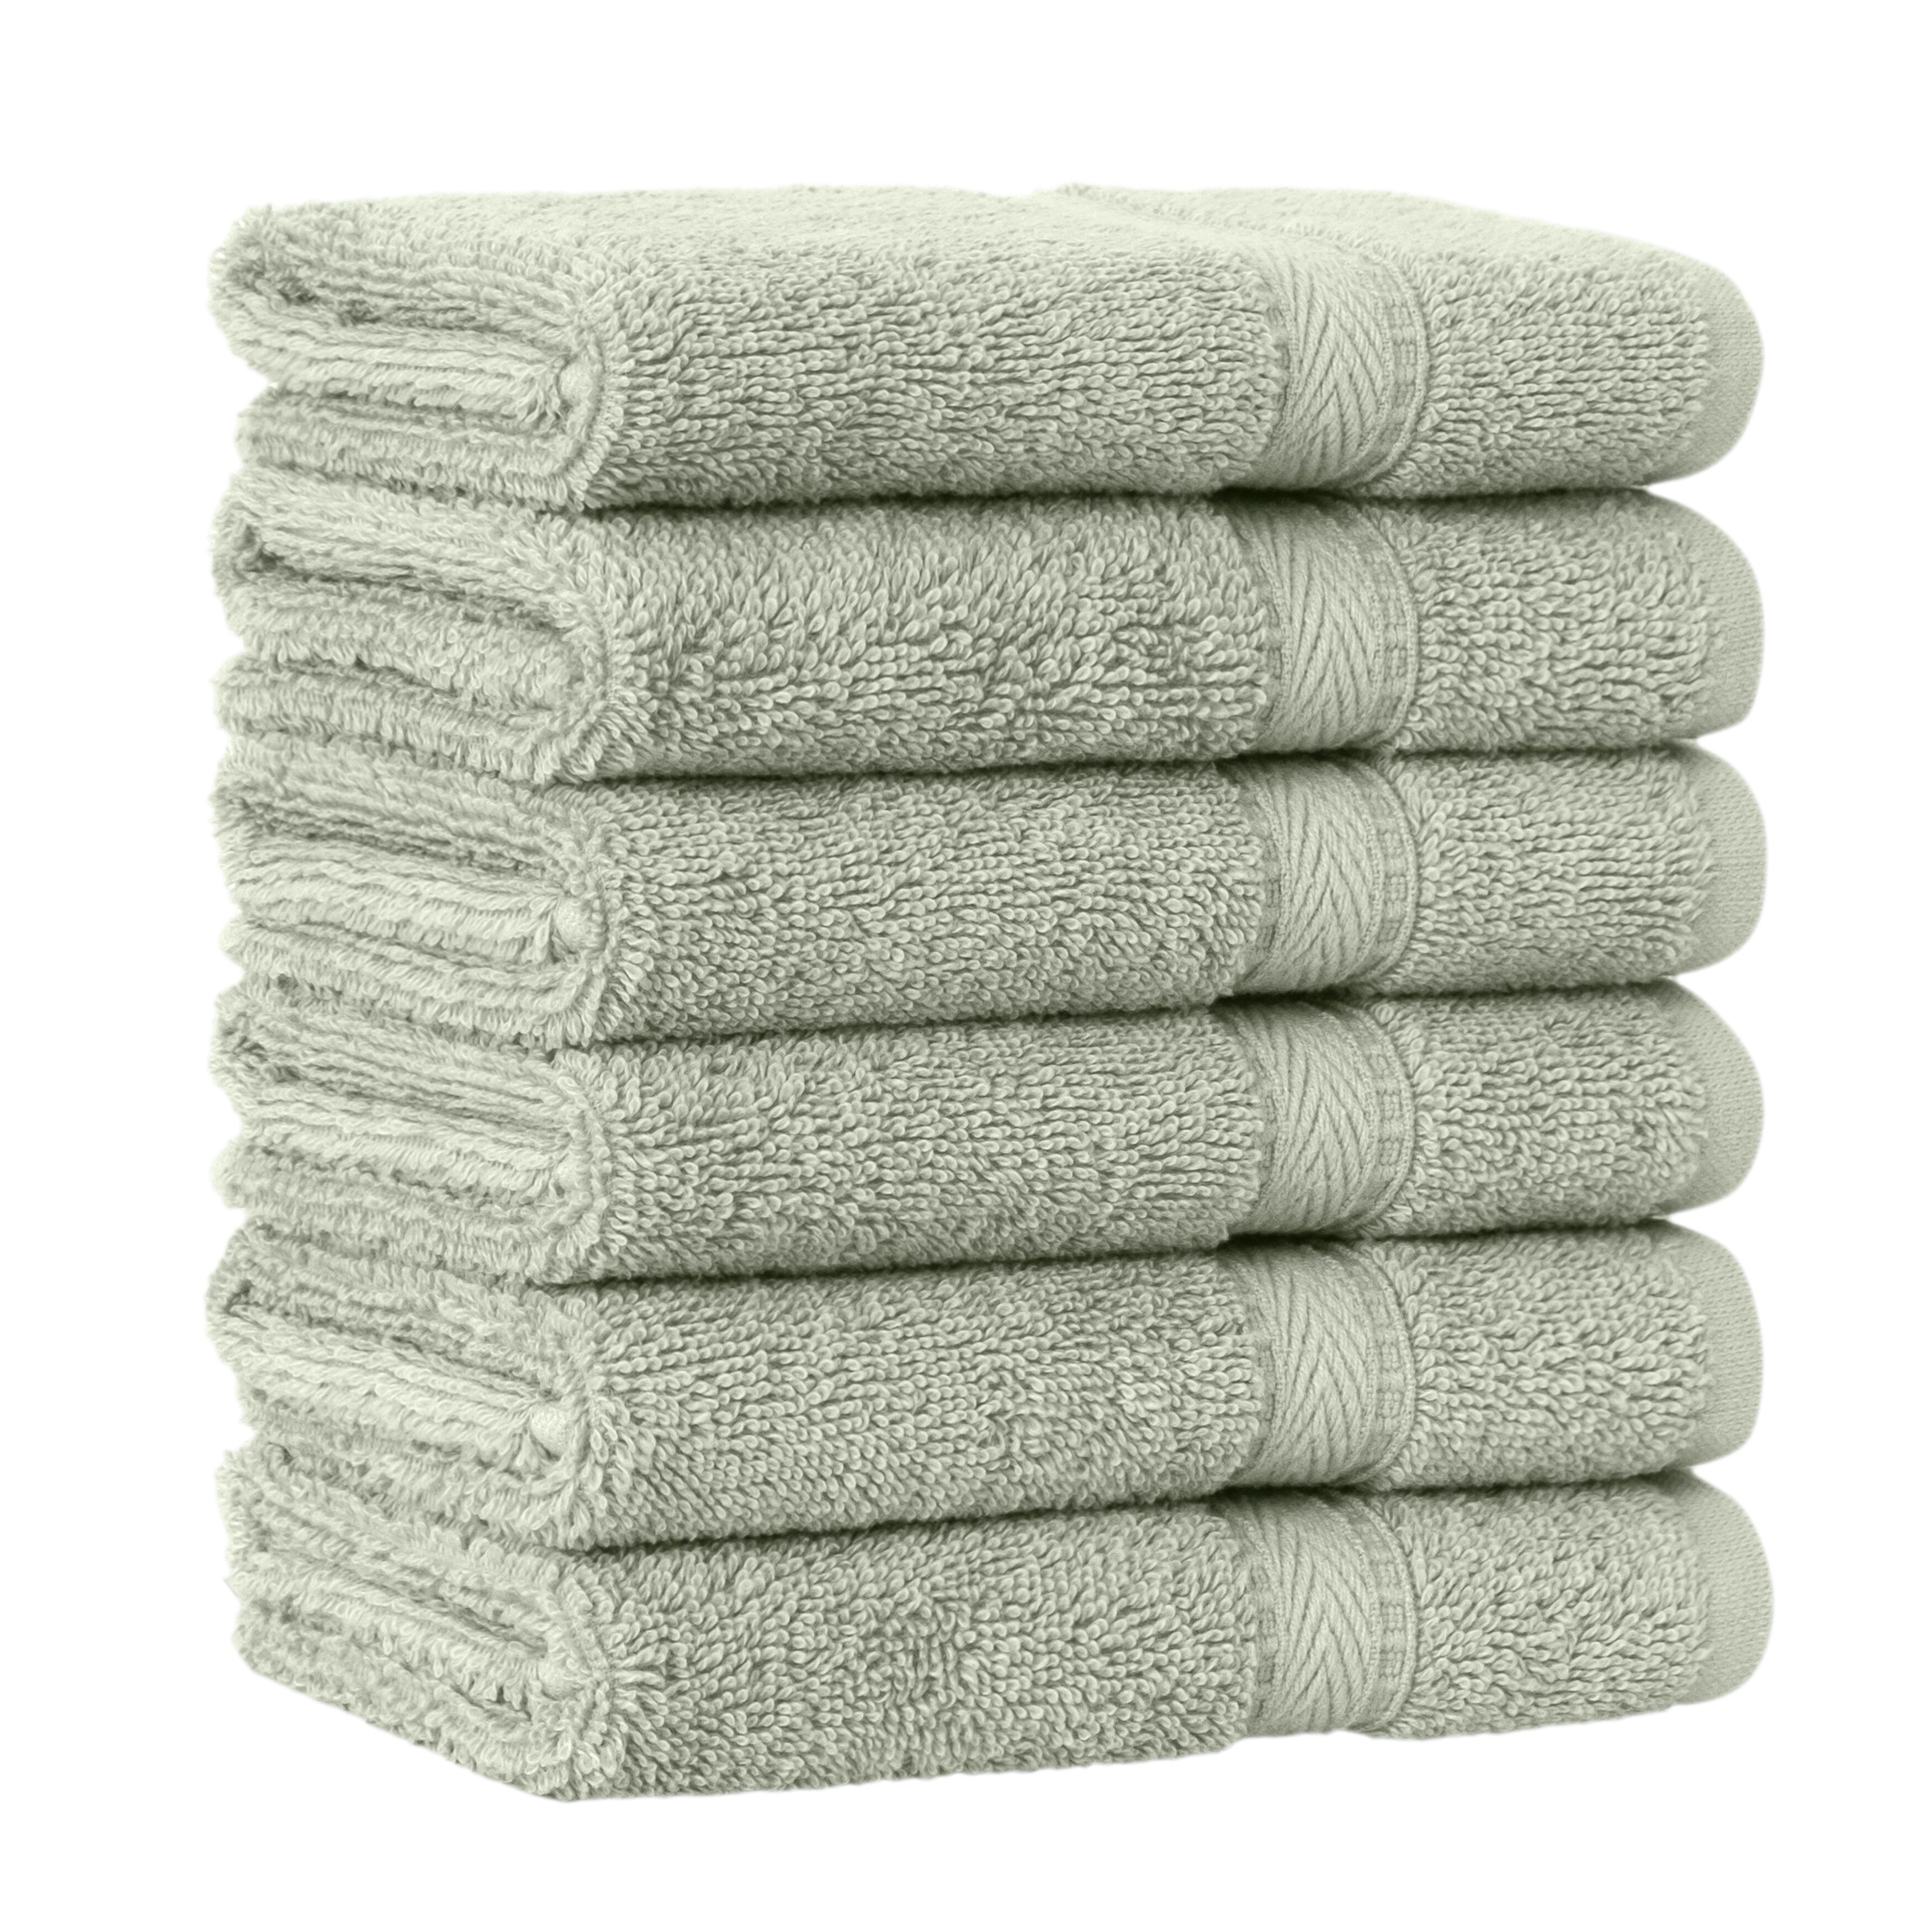 https://ak1.ostkcdn.com/images/products/is/images/direct/03ea55d4decaeb19ebedff89ed74a8fcaf527967/Authentic-Hotel-Spa-Turkish-Cotton-Washcloth-%28Set-of-6%29.jpg